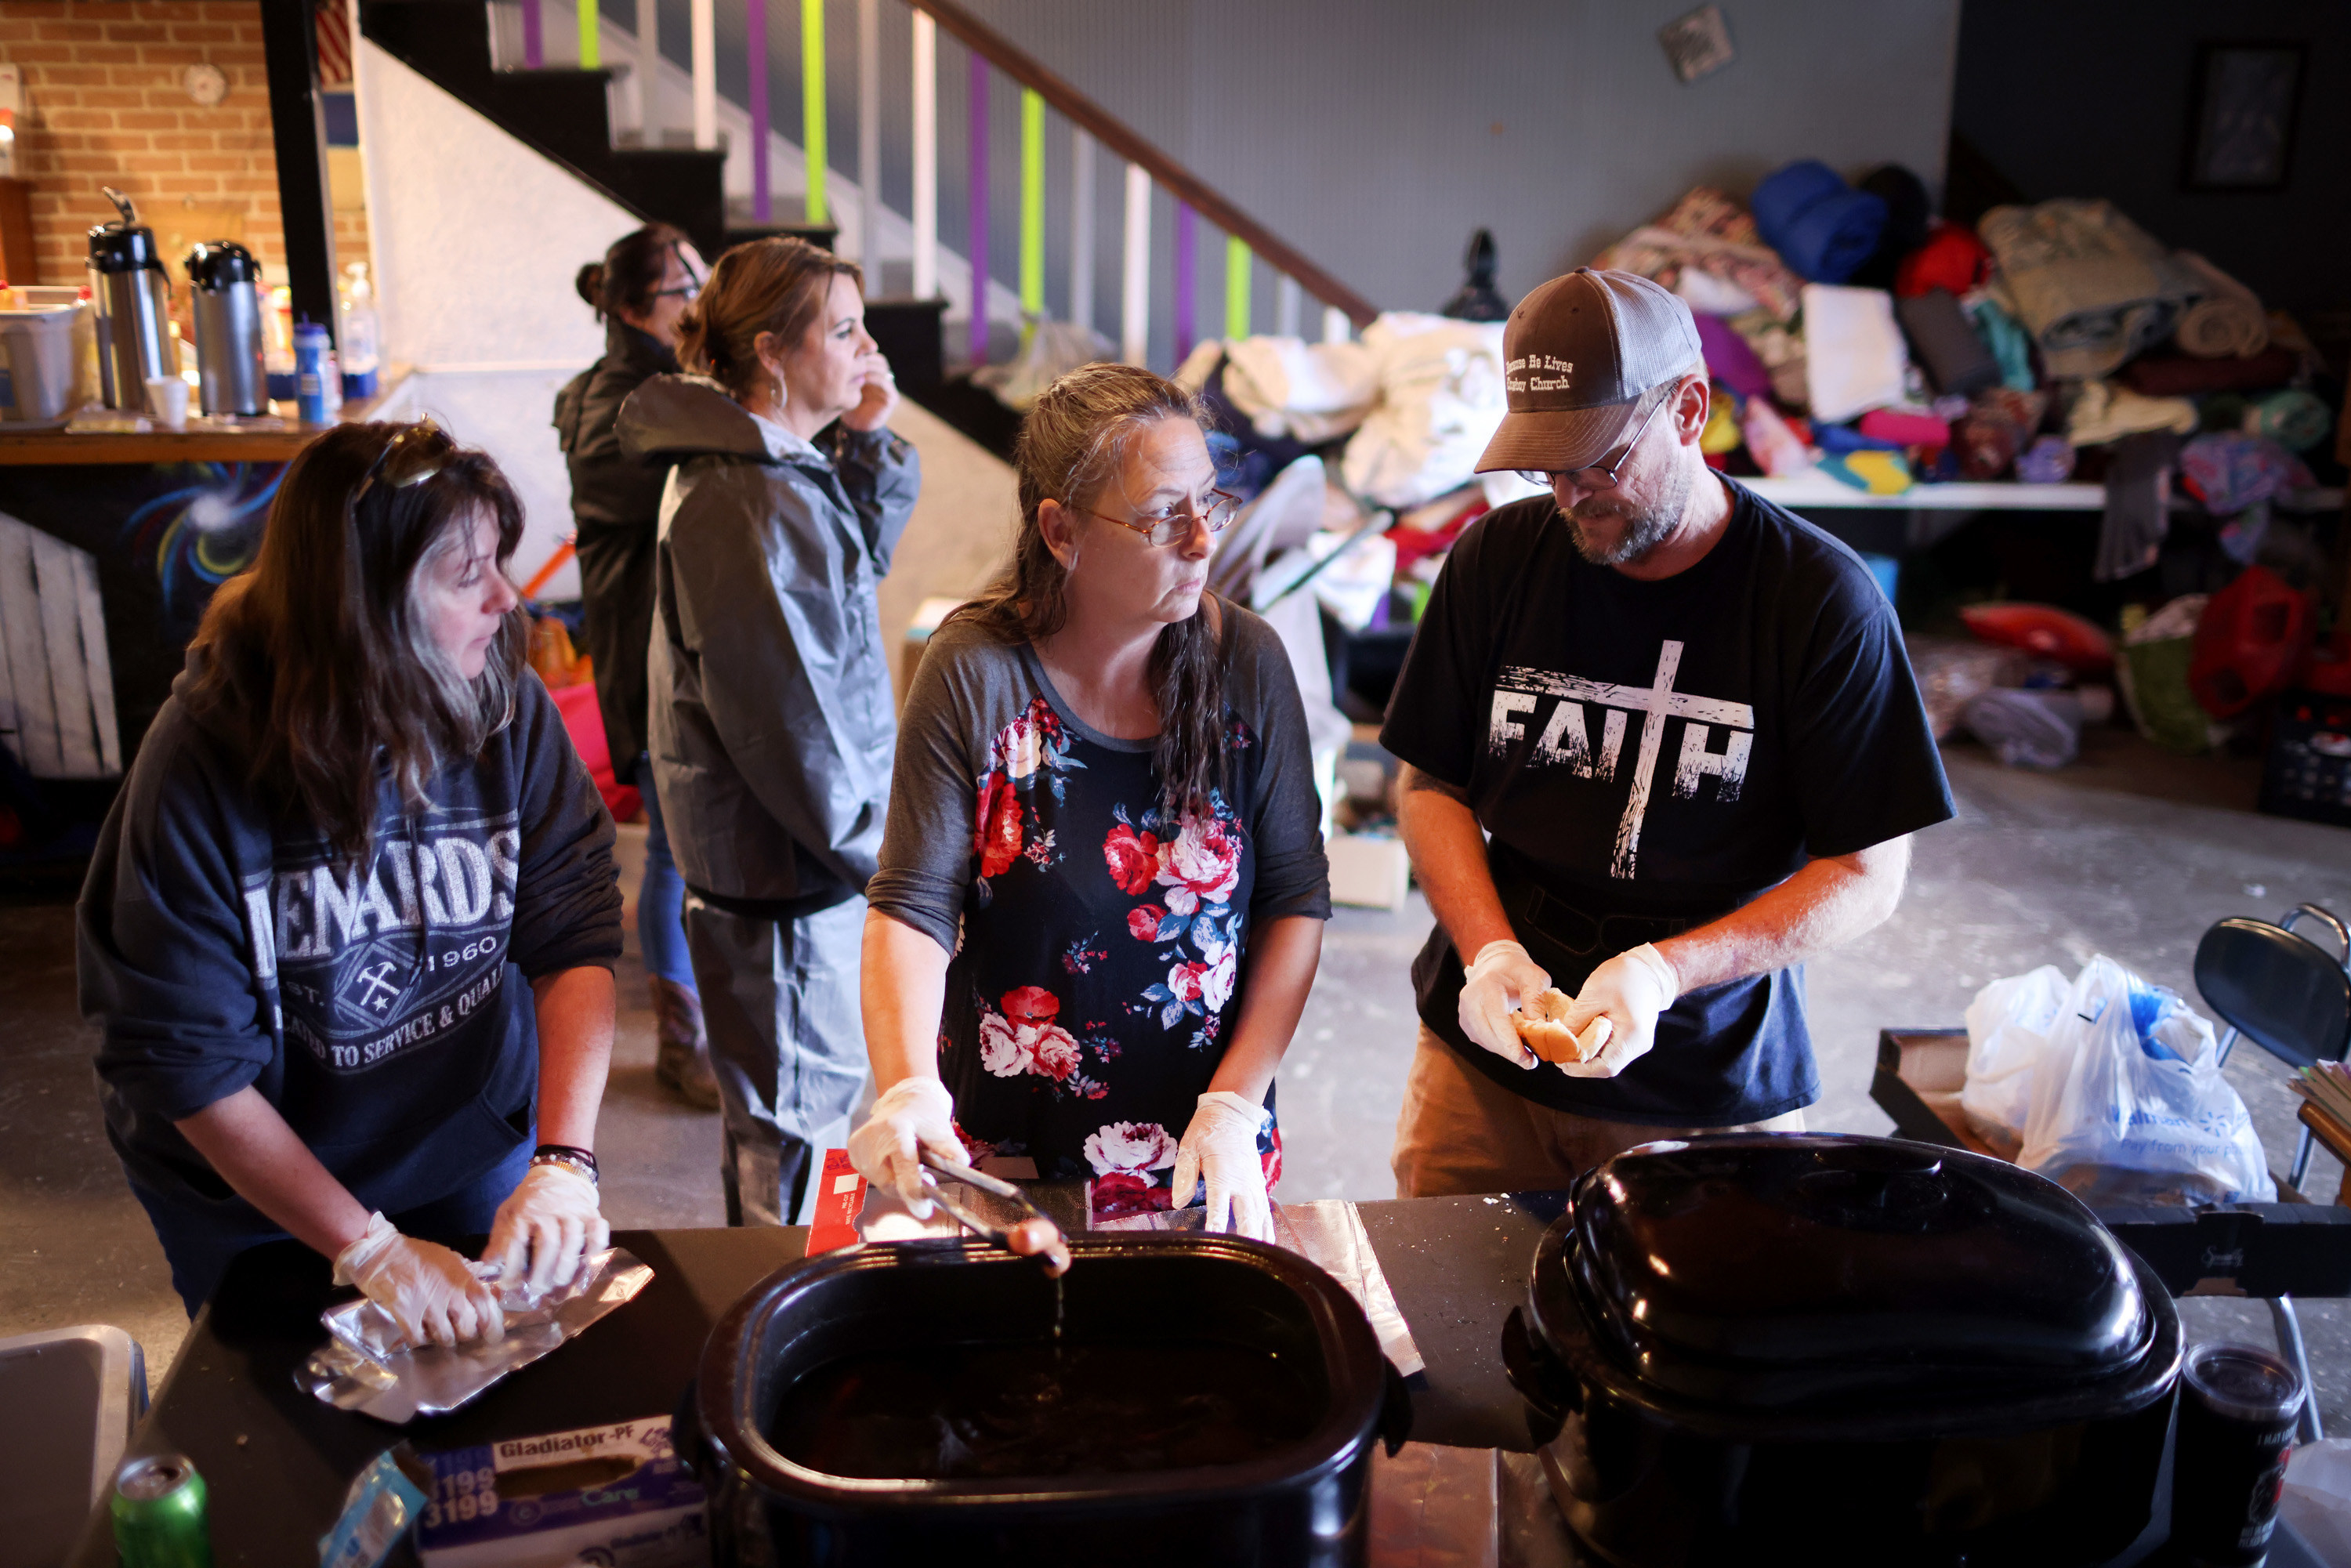 Three women and one man prepare food to distribute to the needy in kentucky, a pile of clothing is behind them 